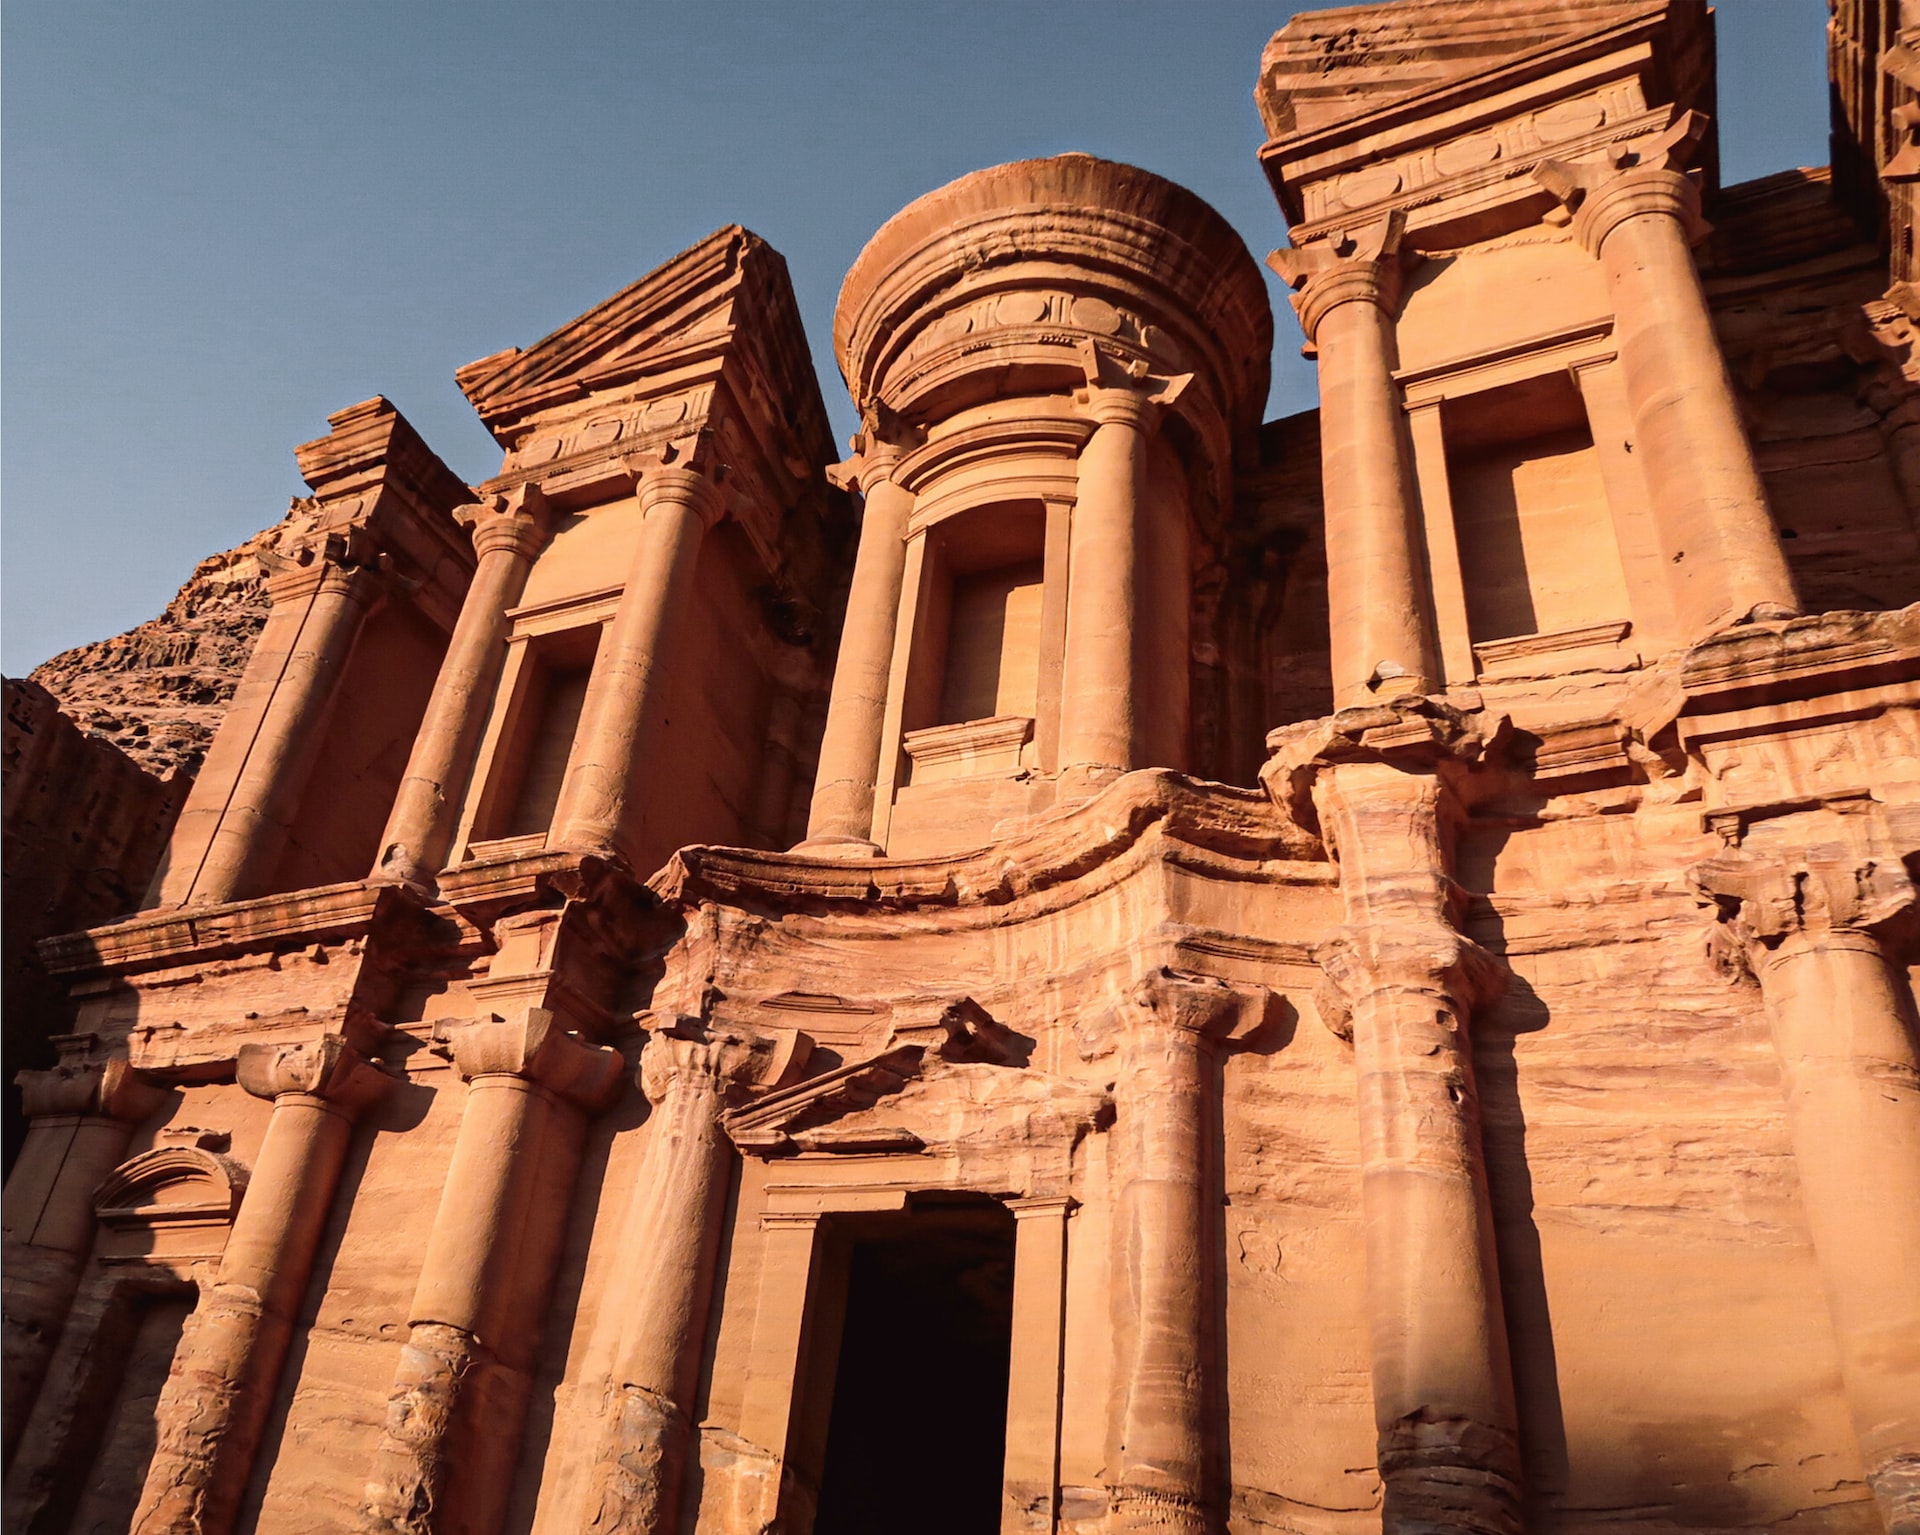 Petra 2-Day Tour from Tel Aviv by Bus